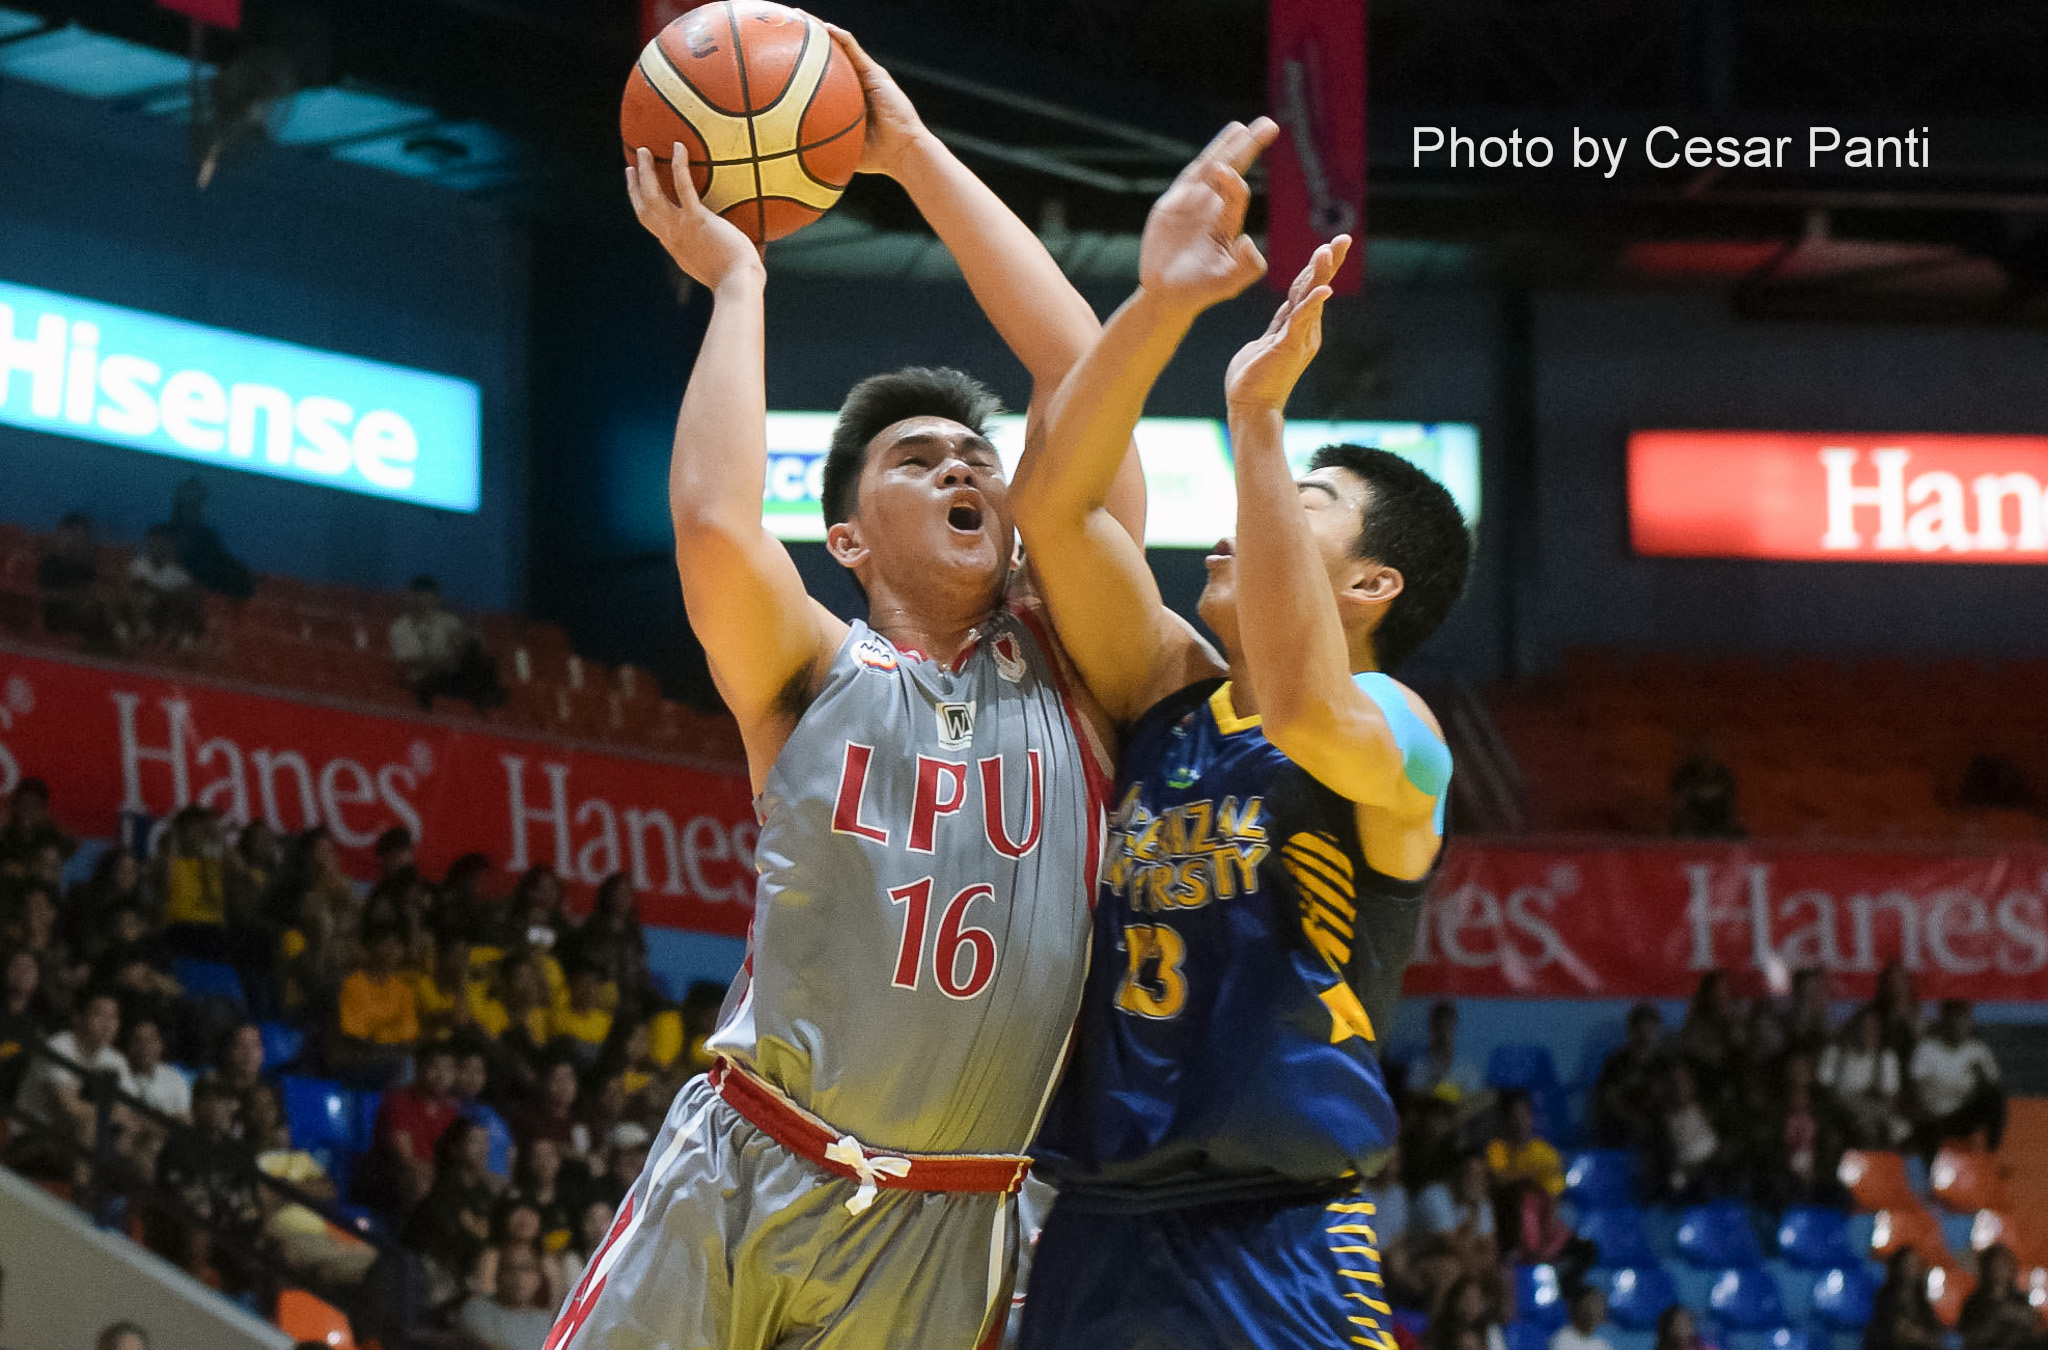 Lyceum routs JRU for third straight win